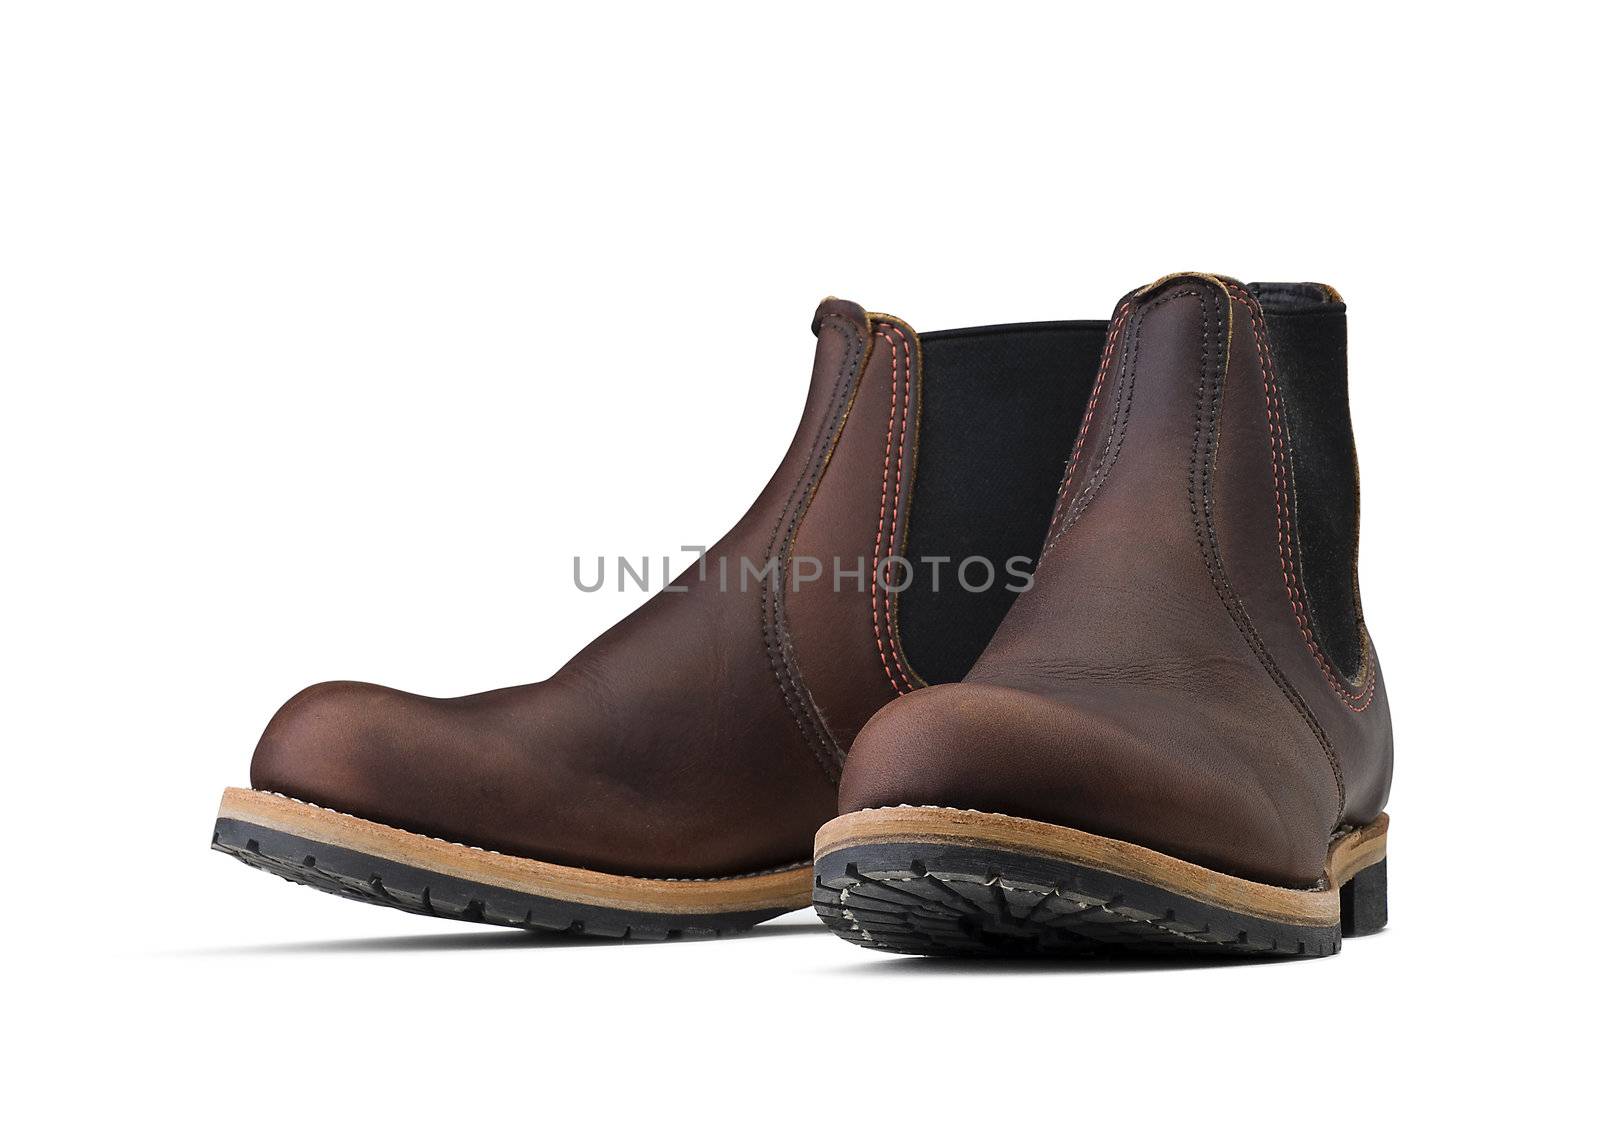 Pair of brown boots